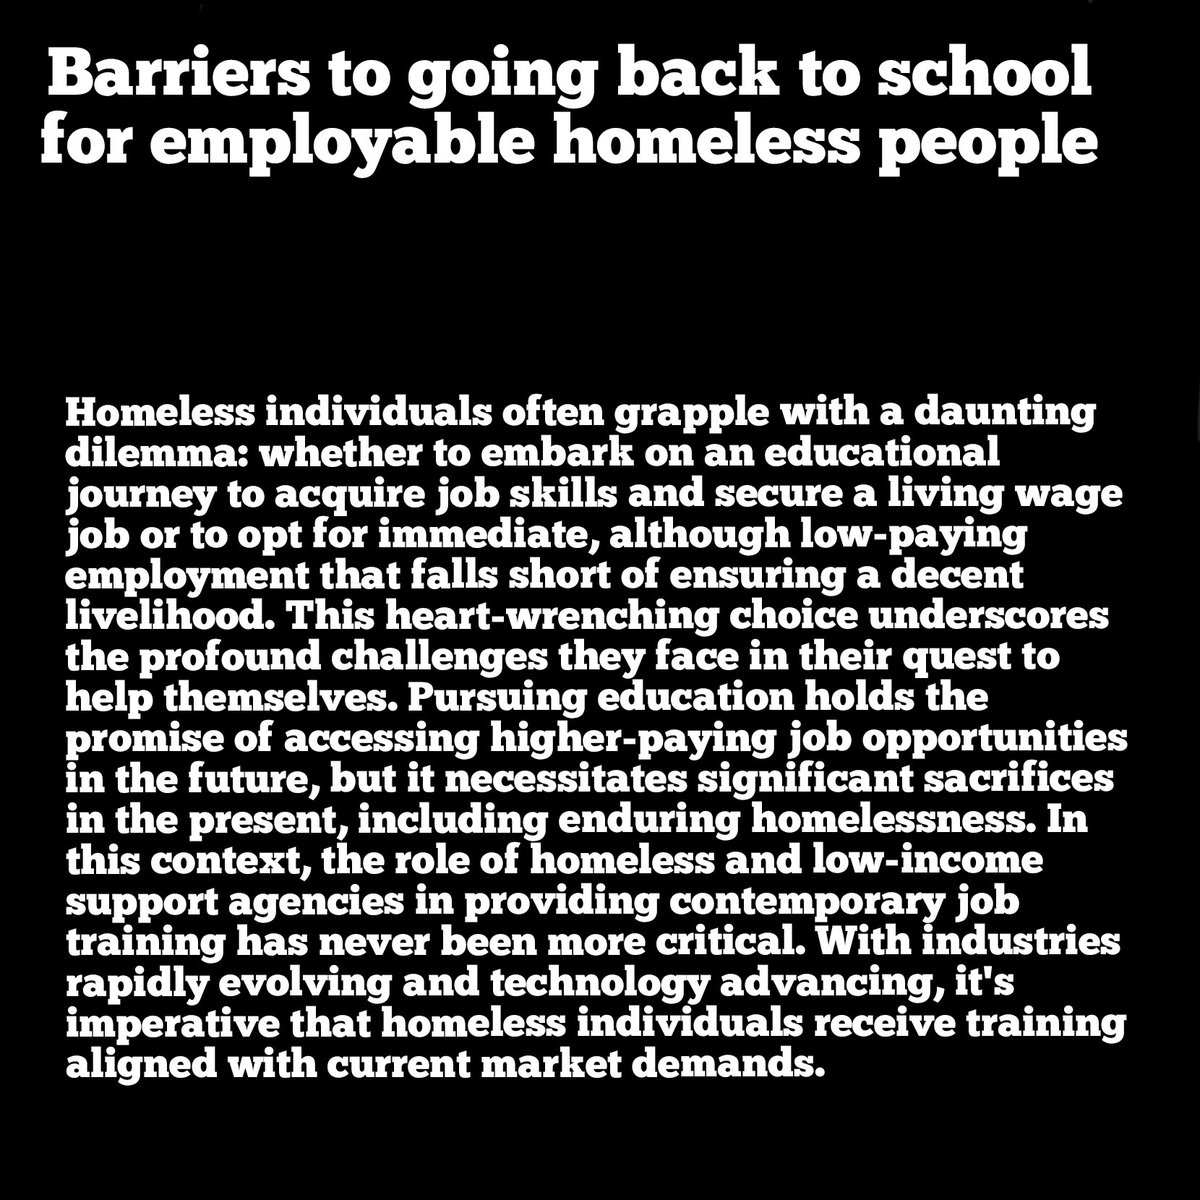 This is part of an article I wrote for #LinkedIn in hopes of grabbing the attention of #HiringManagers

Like my posts? Pls consider donating. Looking for a #job because the Gov & #HomelessAgencies do not help physically #disabled #homeless people

gofundme.com/f/want-my-life…